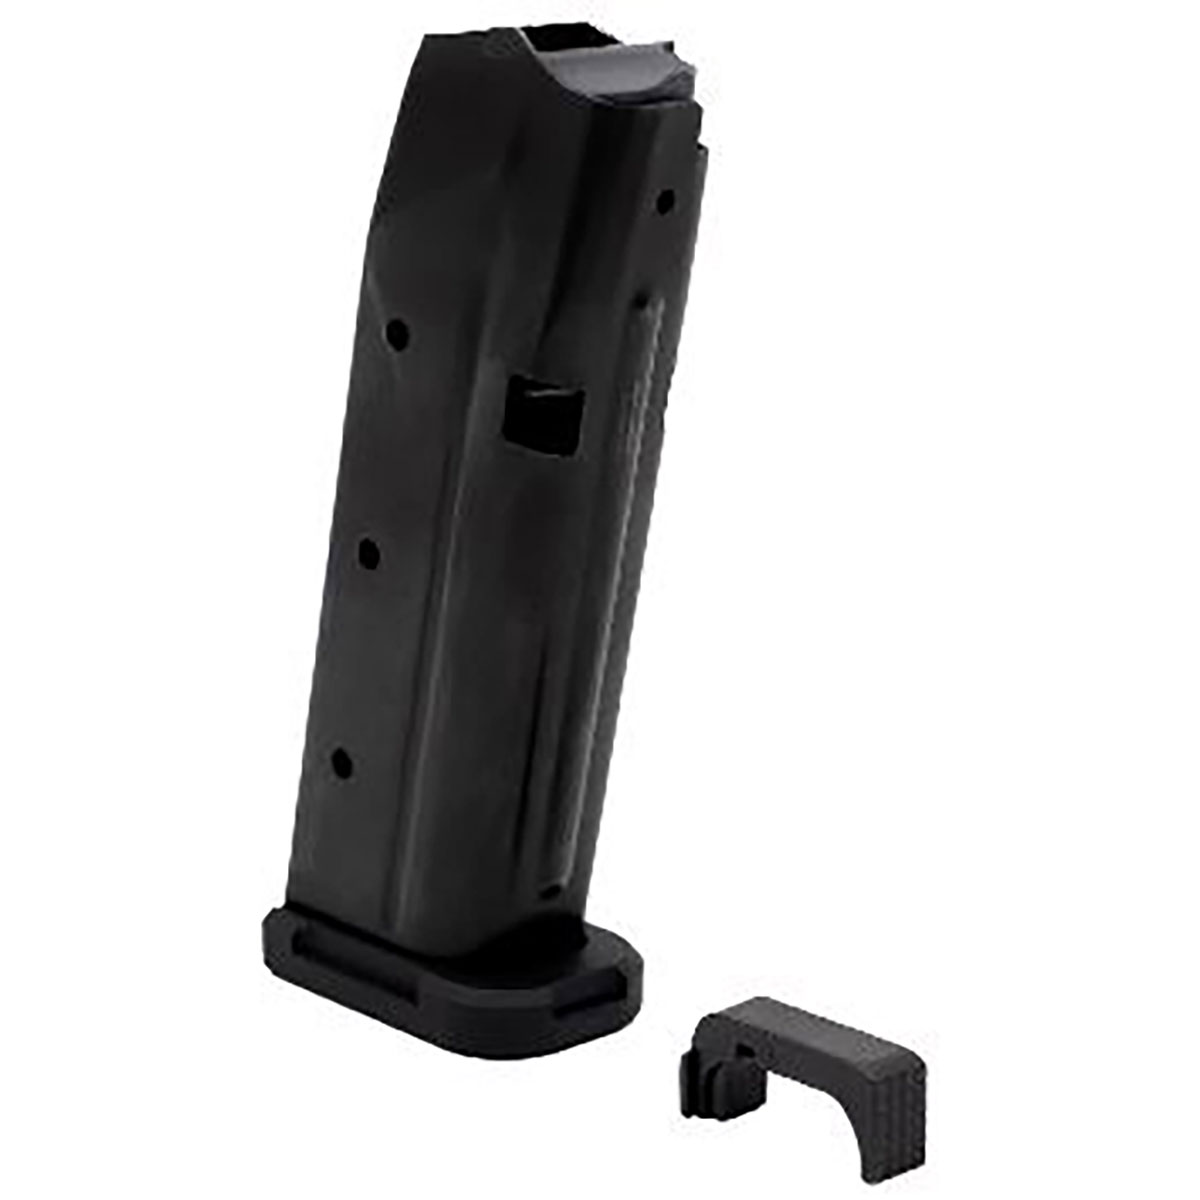 SHIELD ARMS - S15 GEN3 MAGAZINE COMBO KITS FOR GLOCK 43X/48